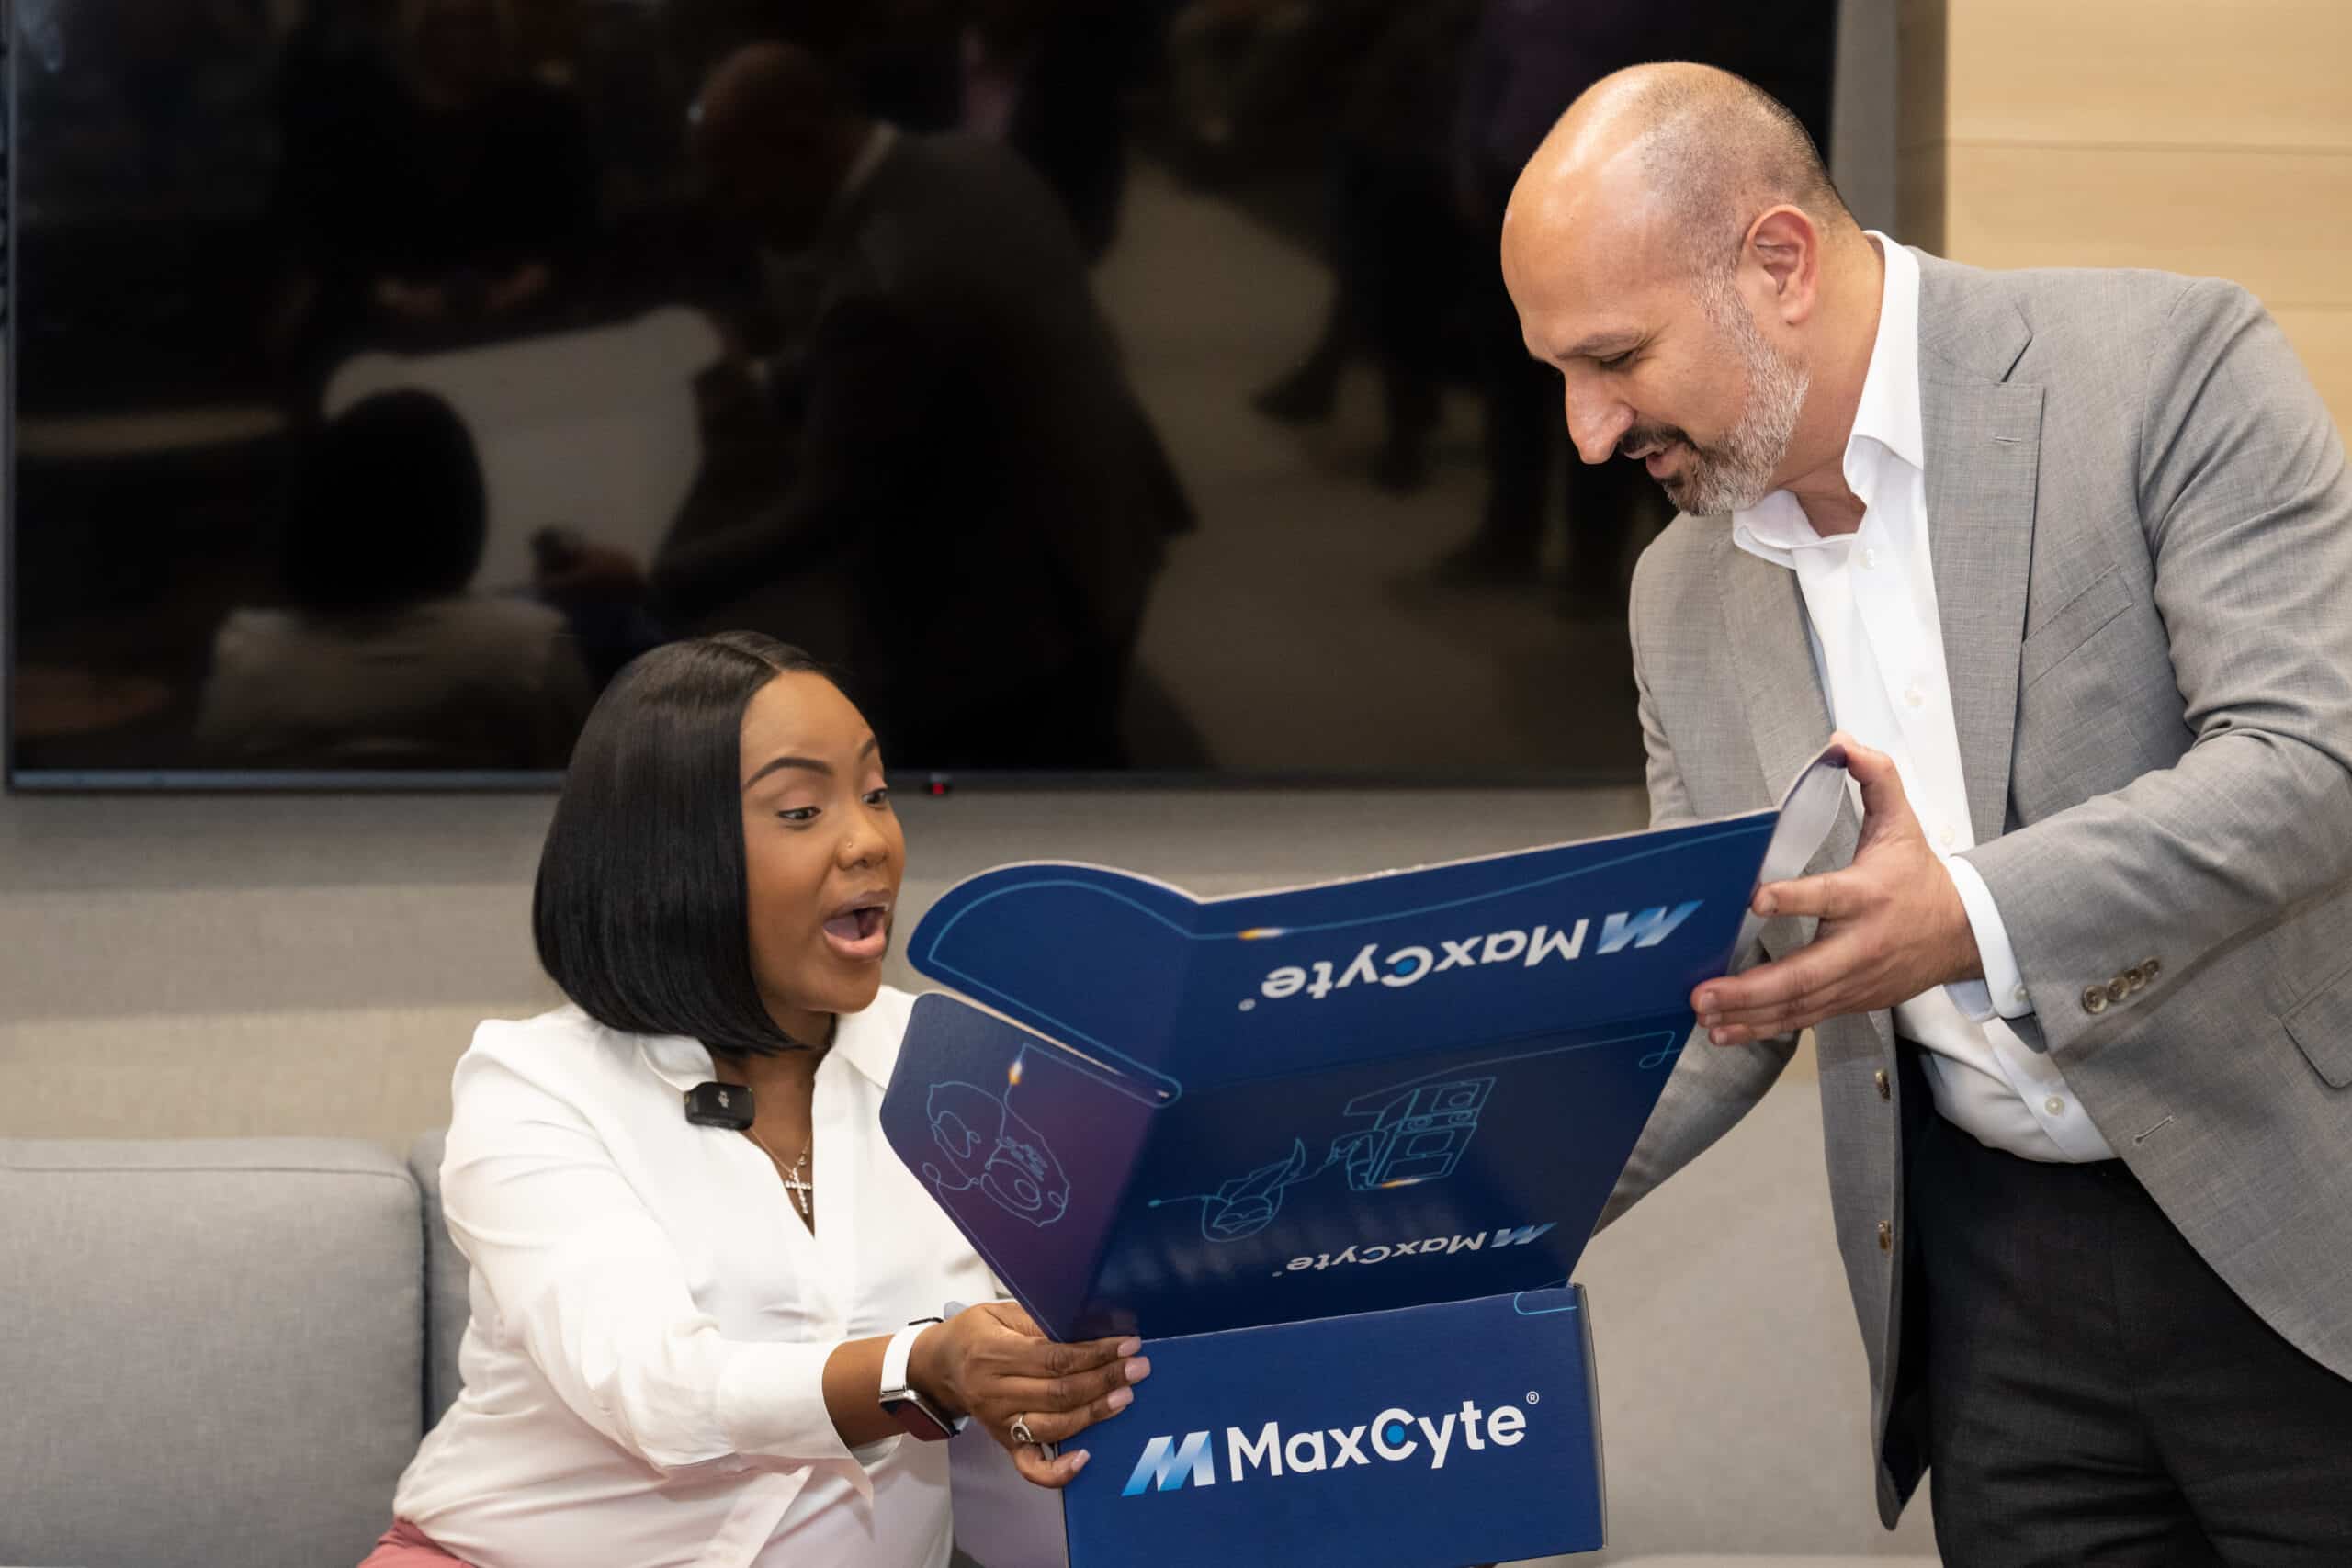 Victoria Gray being presented with a gift box from MaxCyte by Maher Masoud, CEO of MaxCyte